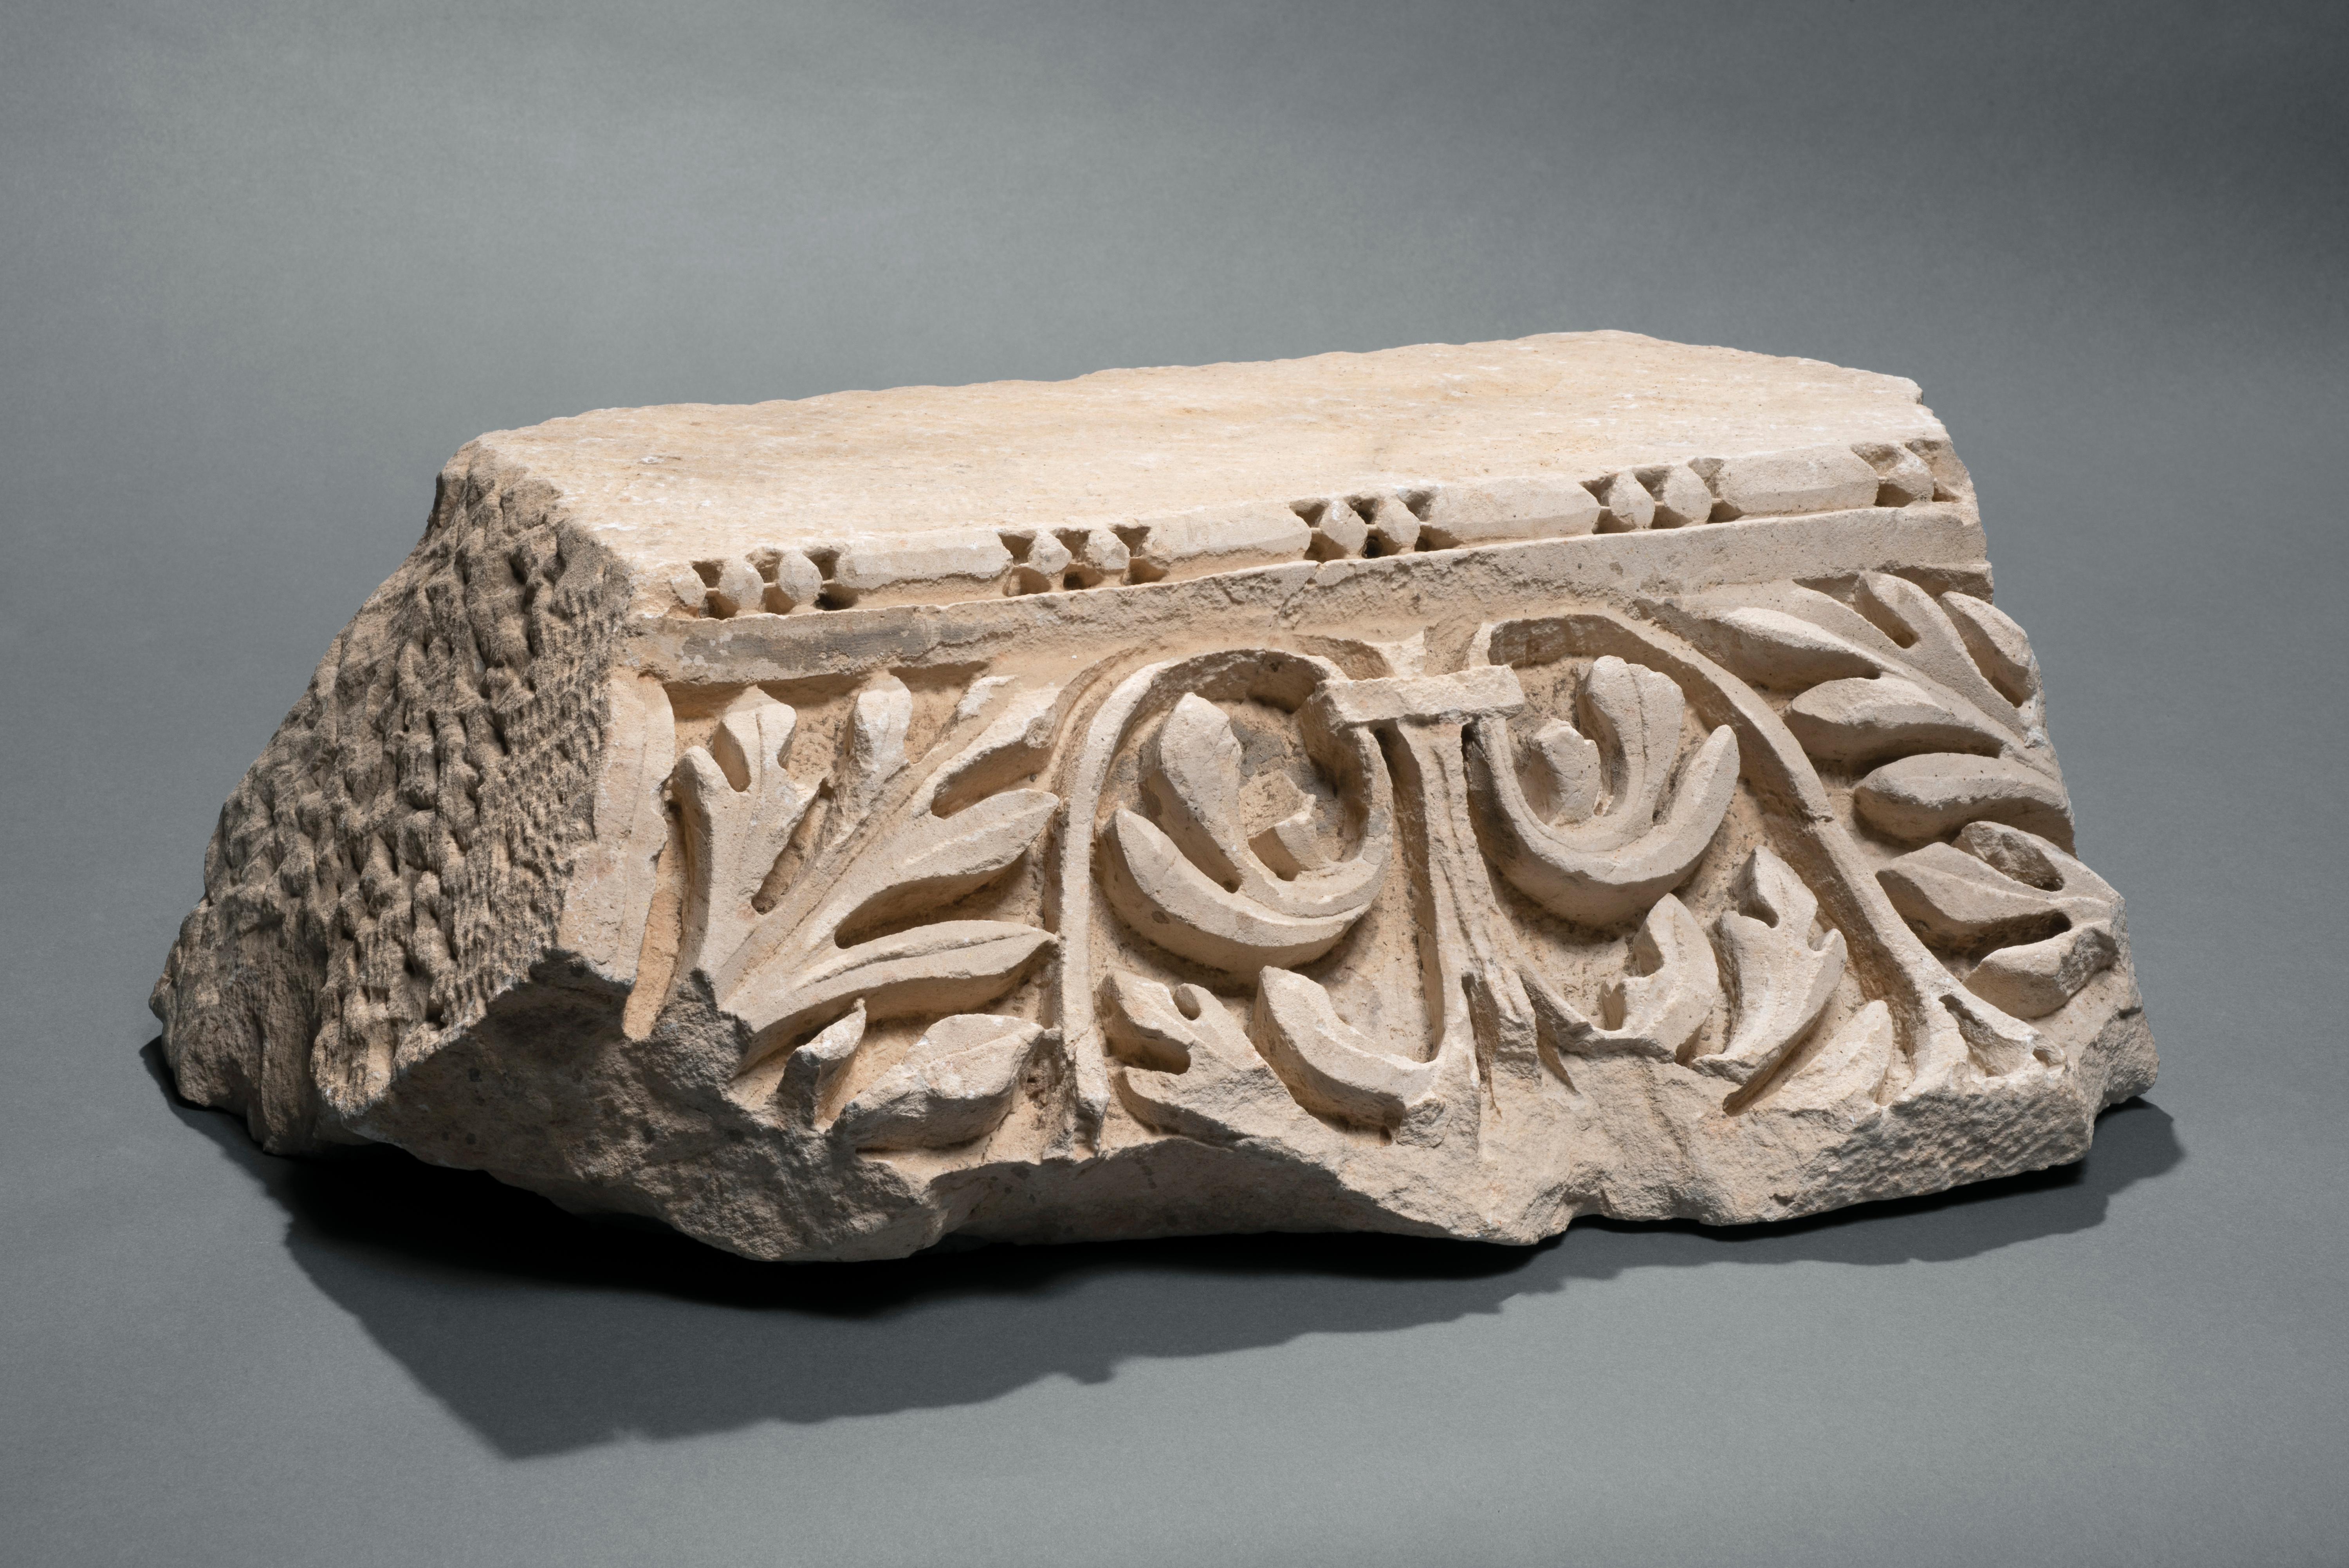 Unknown Abstract Sculpture – ANCIENT MARBLE RELIEF ACHANTUS LEAVES „PULVINO“ ROMAN EMPIRE 2ND CENTURY AD